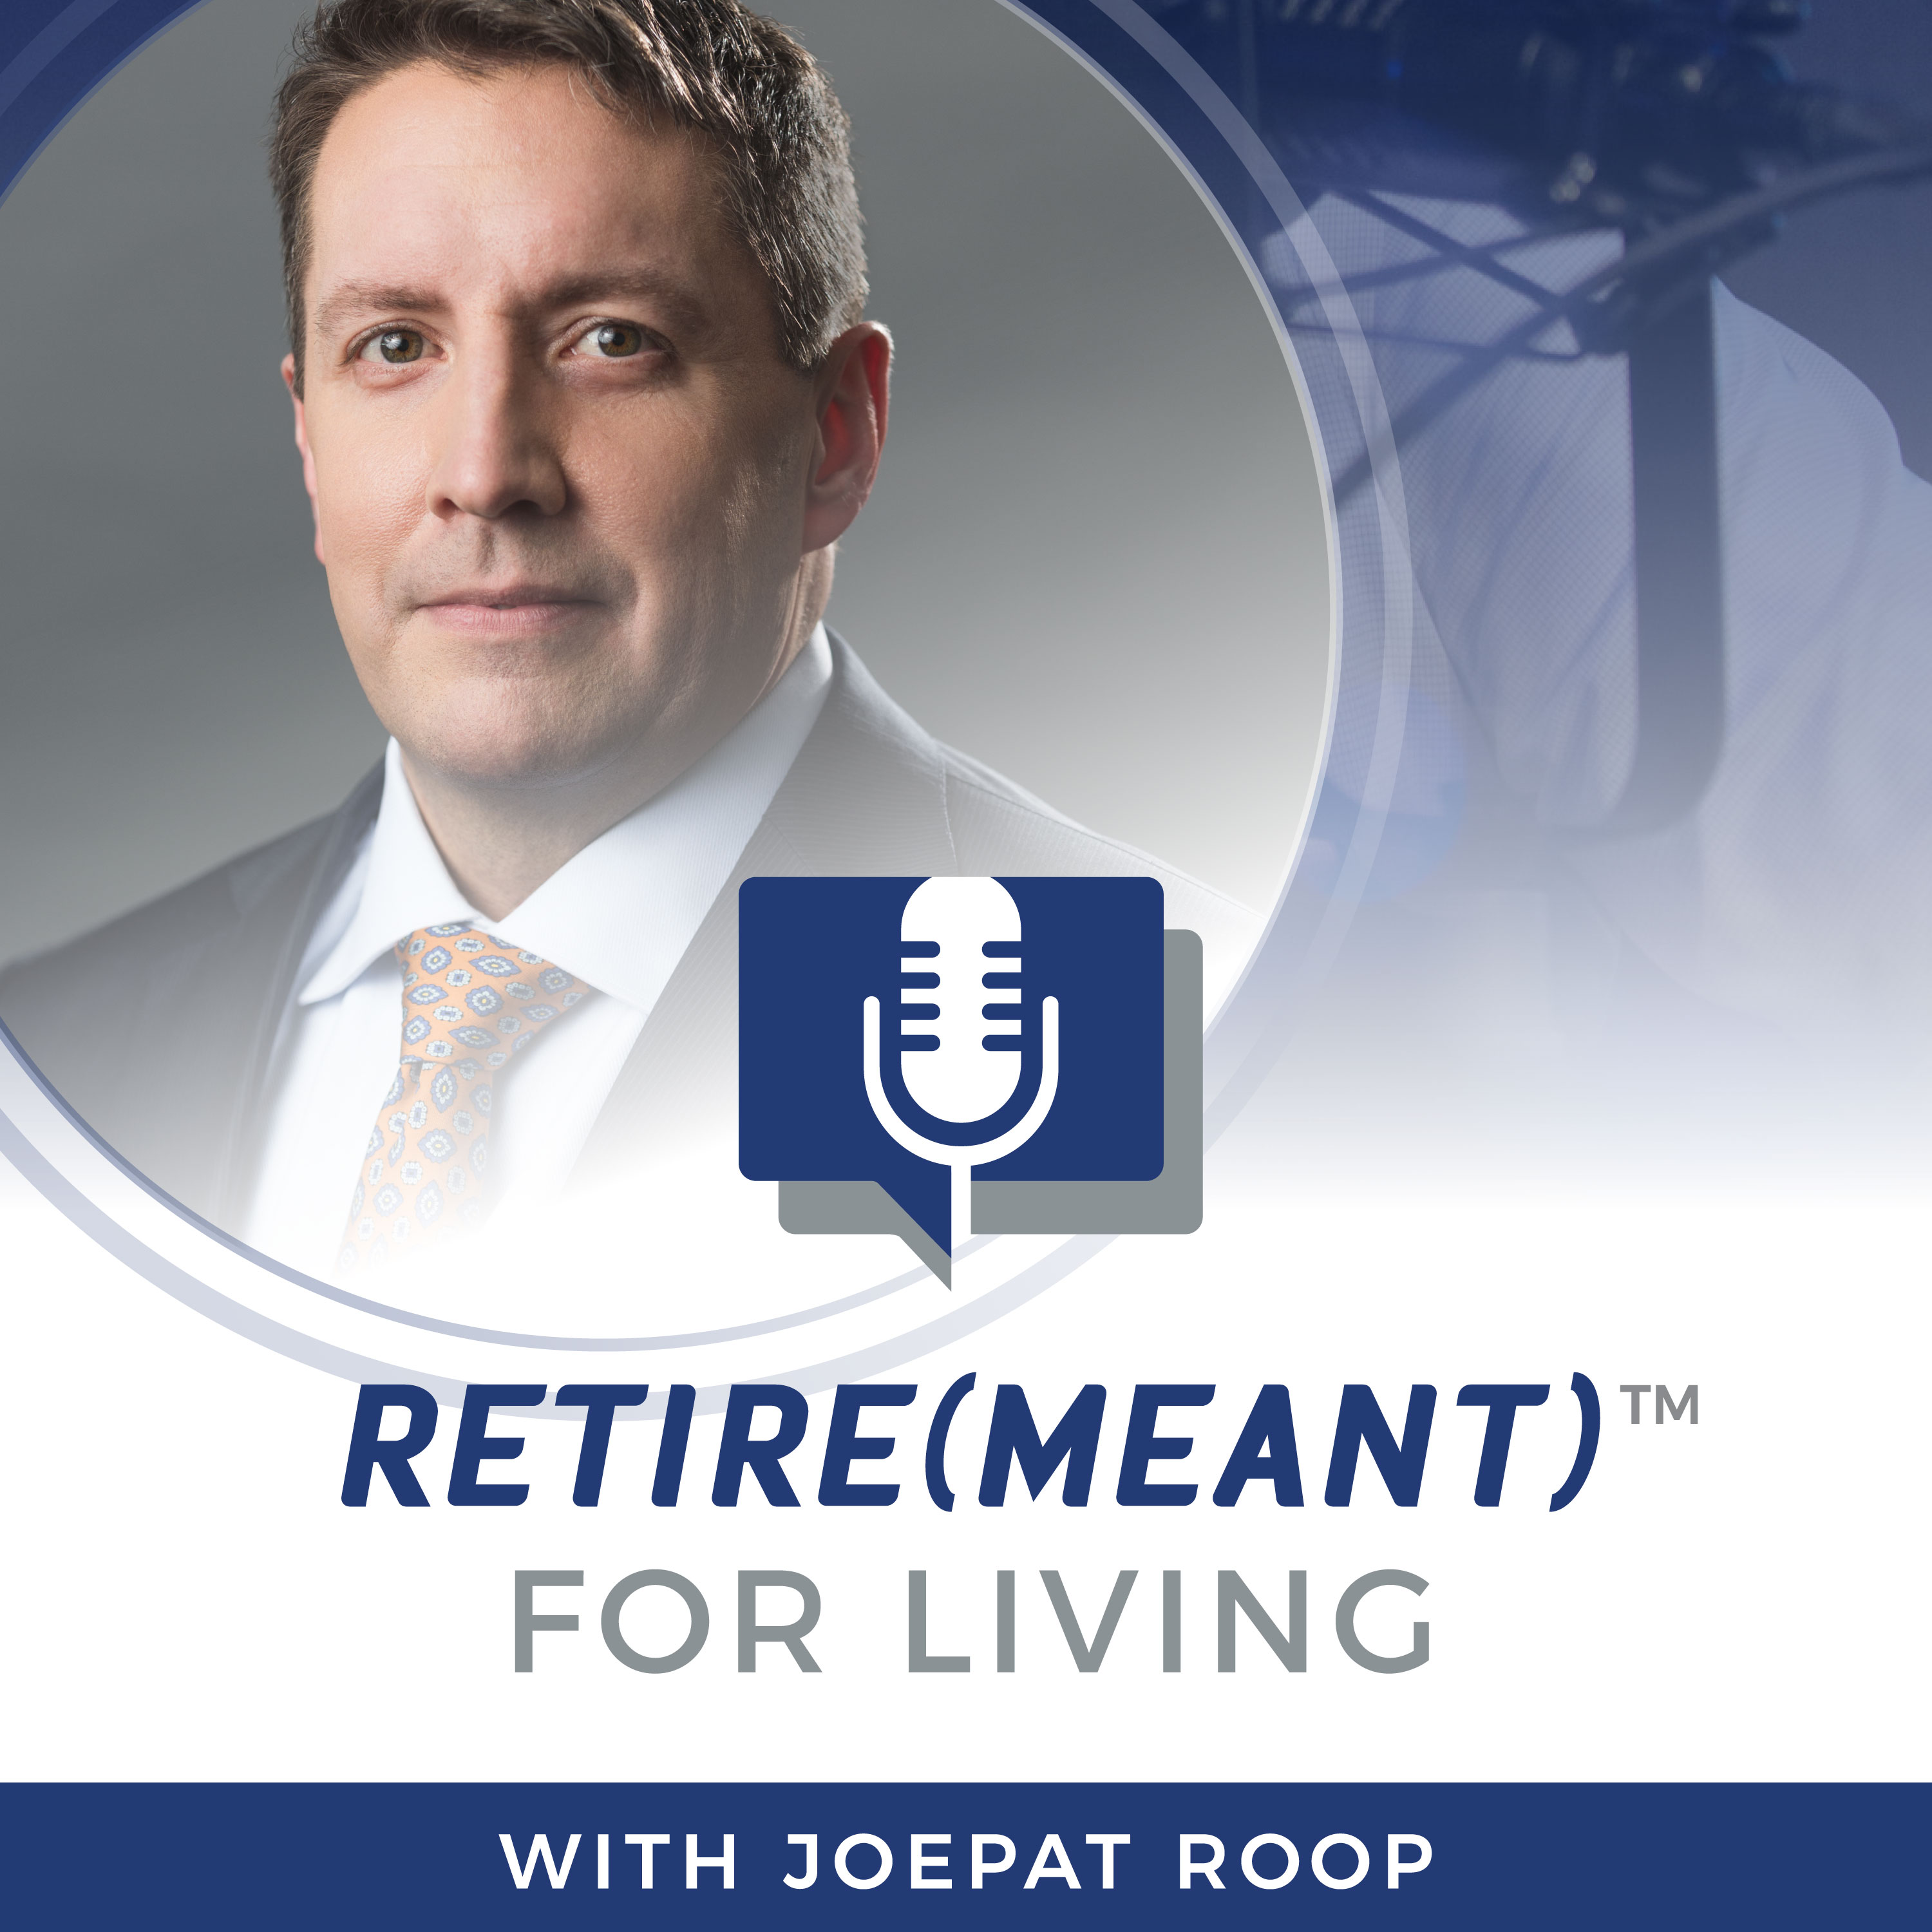 Finding Your "Retirement Rush"